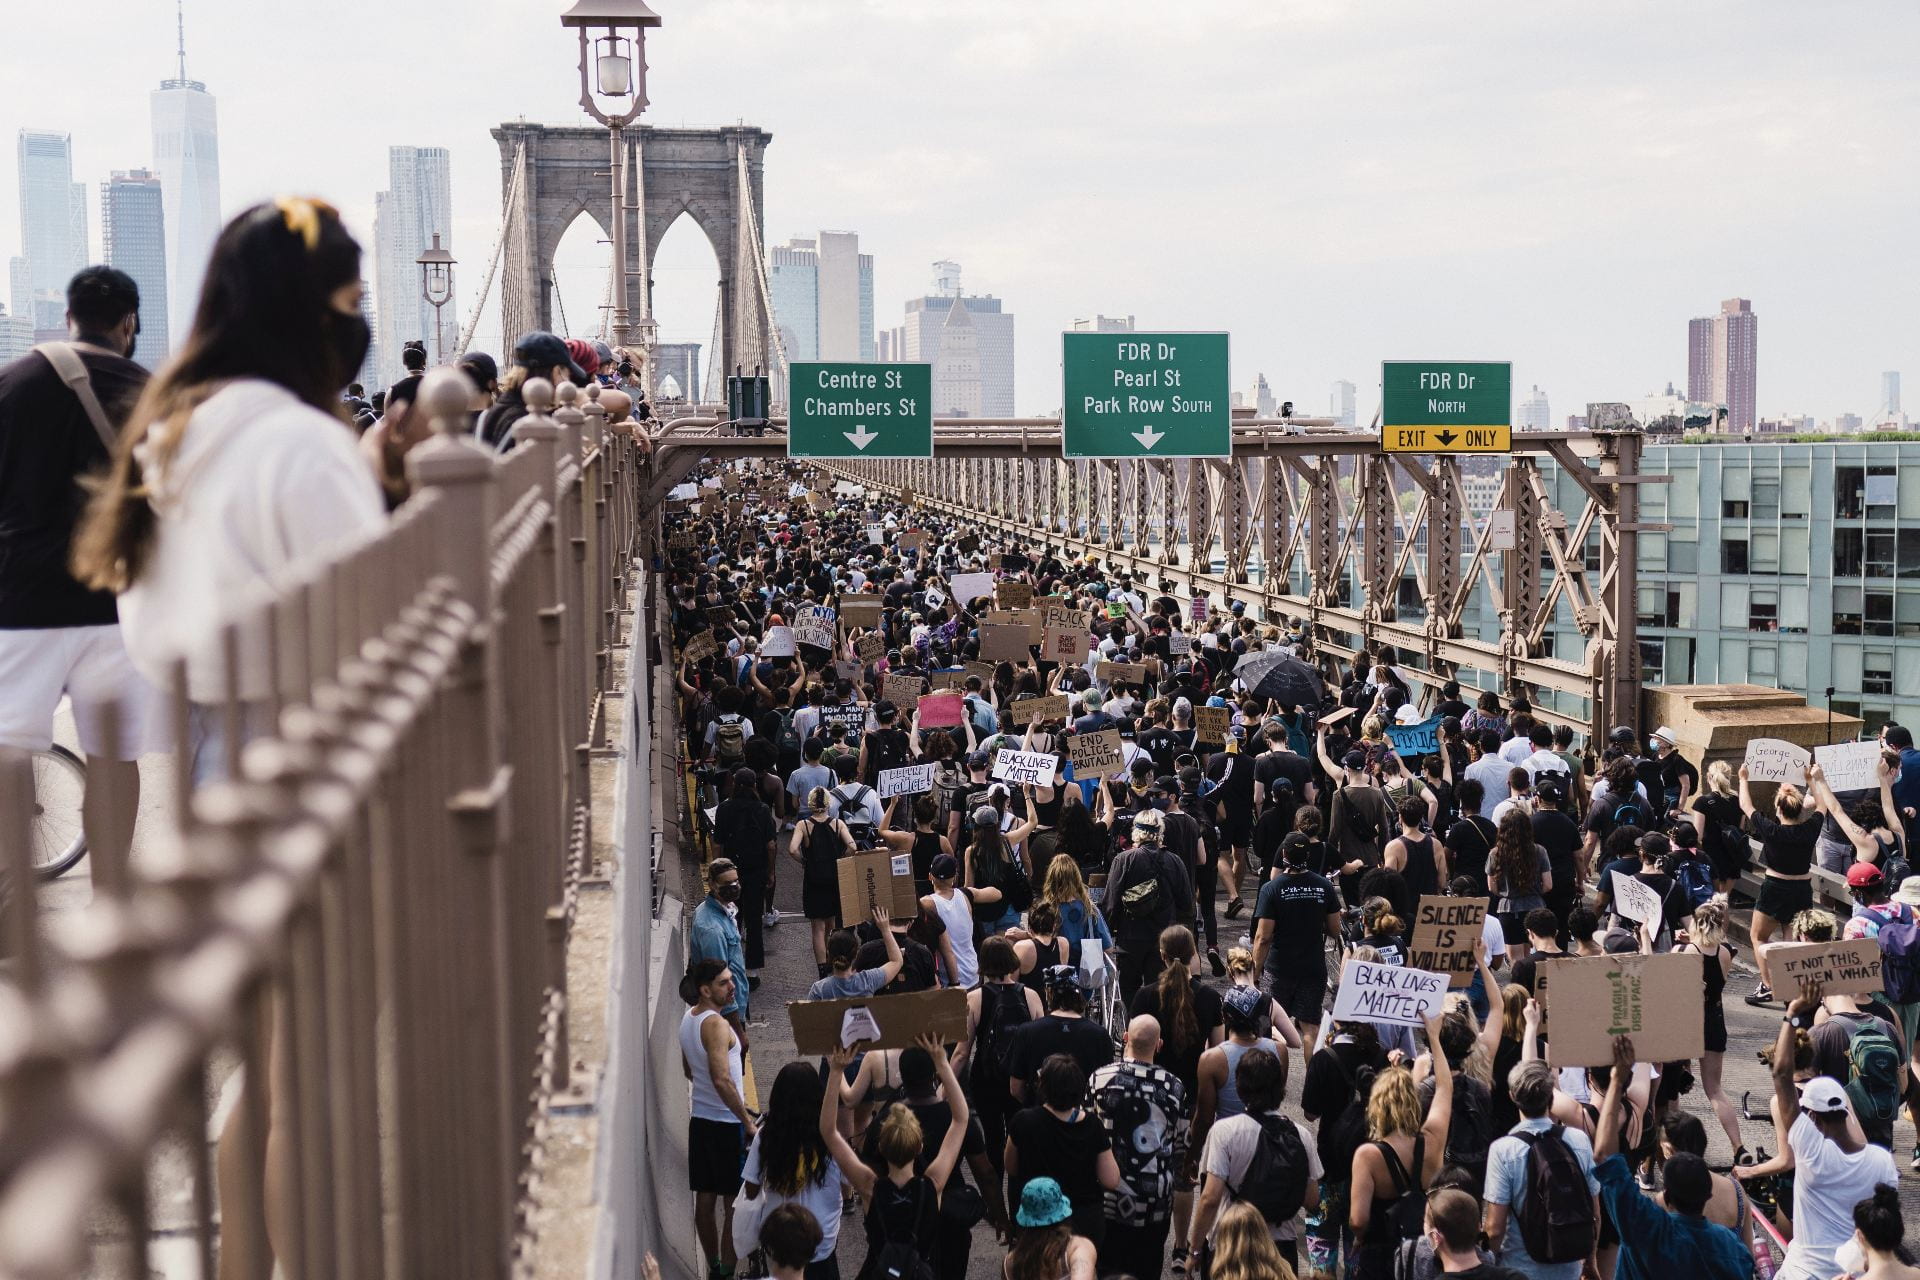 Black Lives Matter Movement protest on the Brooklynn Bridge. Photo shows the bridge full of people holding signs to protest.